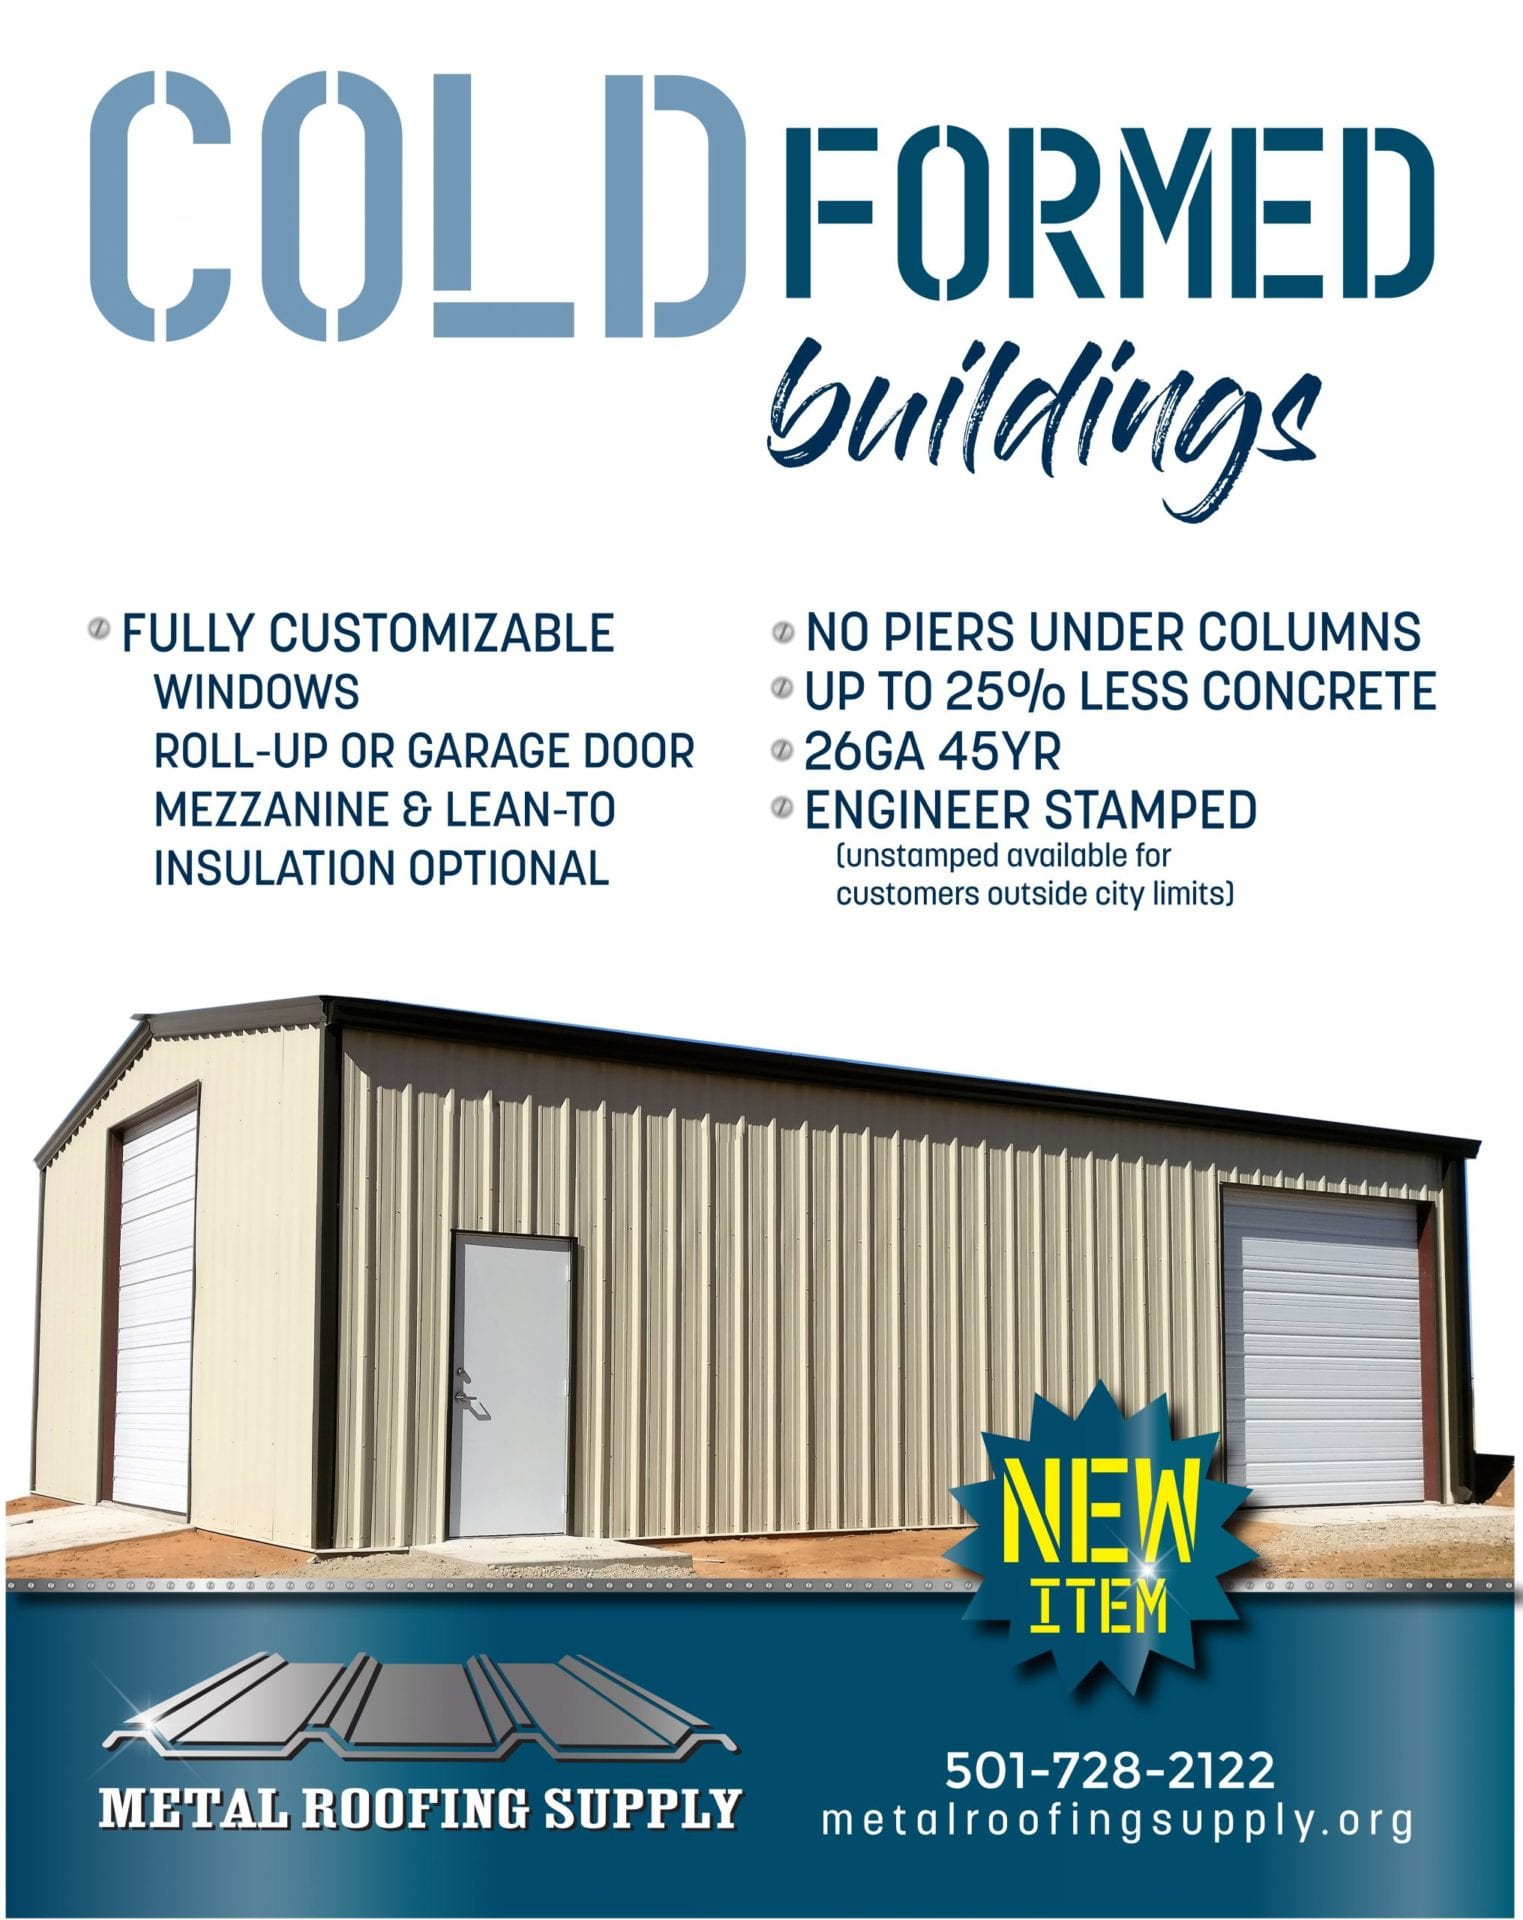 Cold Formed Building info